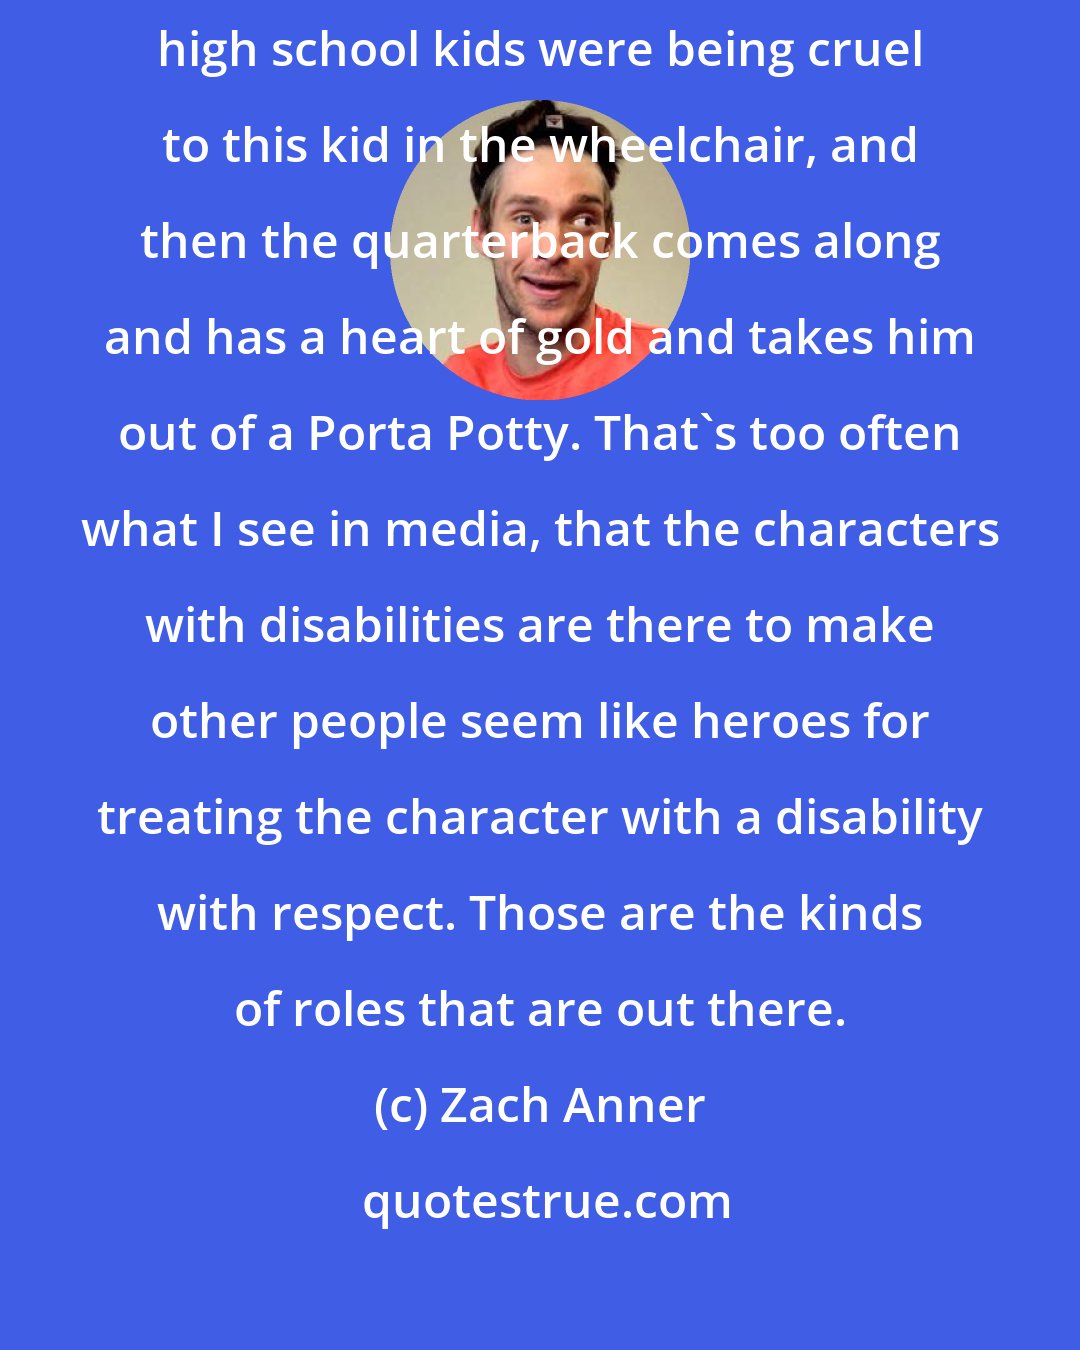 Zach Anner: When I read the script [of Glee], the whole premise was that all the high school kids were being cruel to this kid in the wheelchair, and then the quarterback comes along and has a heart of gold and takes him out of a Porta Potty. That's too often what I see in media, that the characters with disabilities are there to make other people seem like heroes for treating the character with a disability with respect. Those are the kinds of roles that are out there.